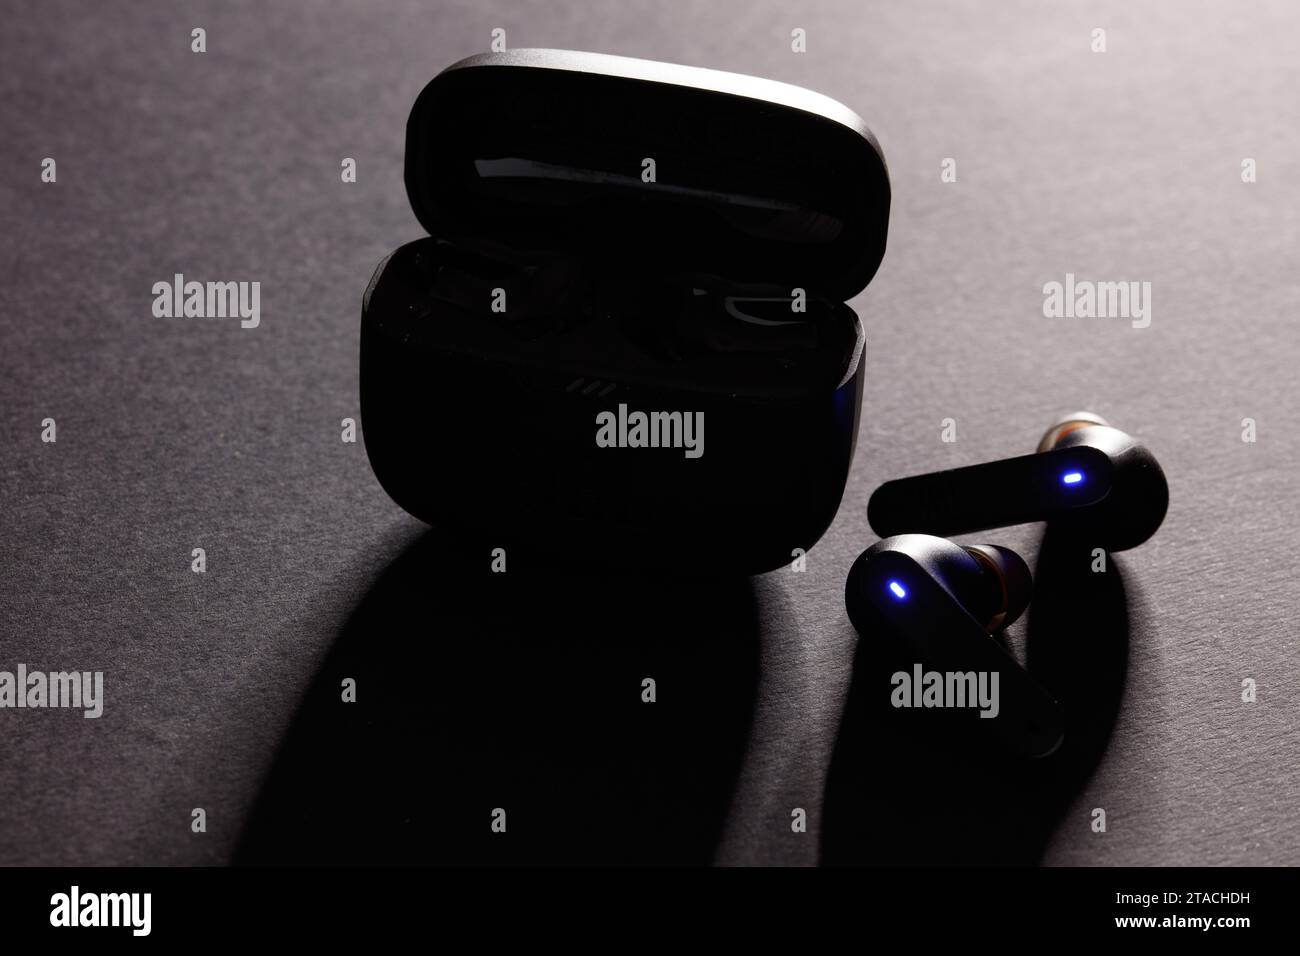 a studio shot of a pair of black jbl wireless bluetooth earphones, against a dramatically lit black background Stock Photo